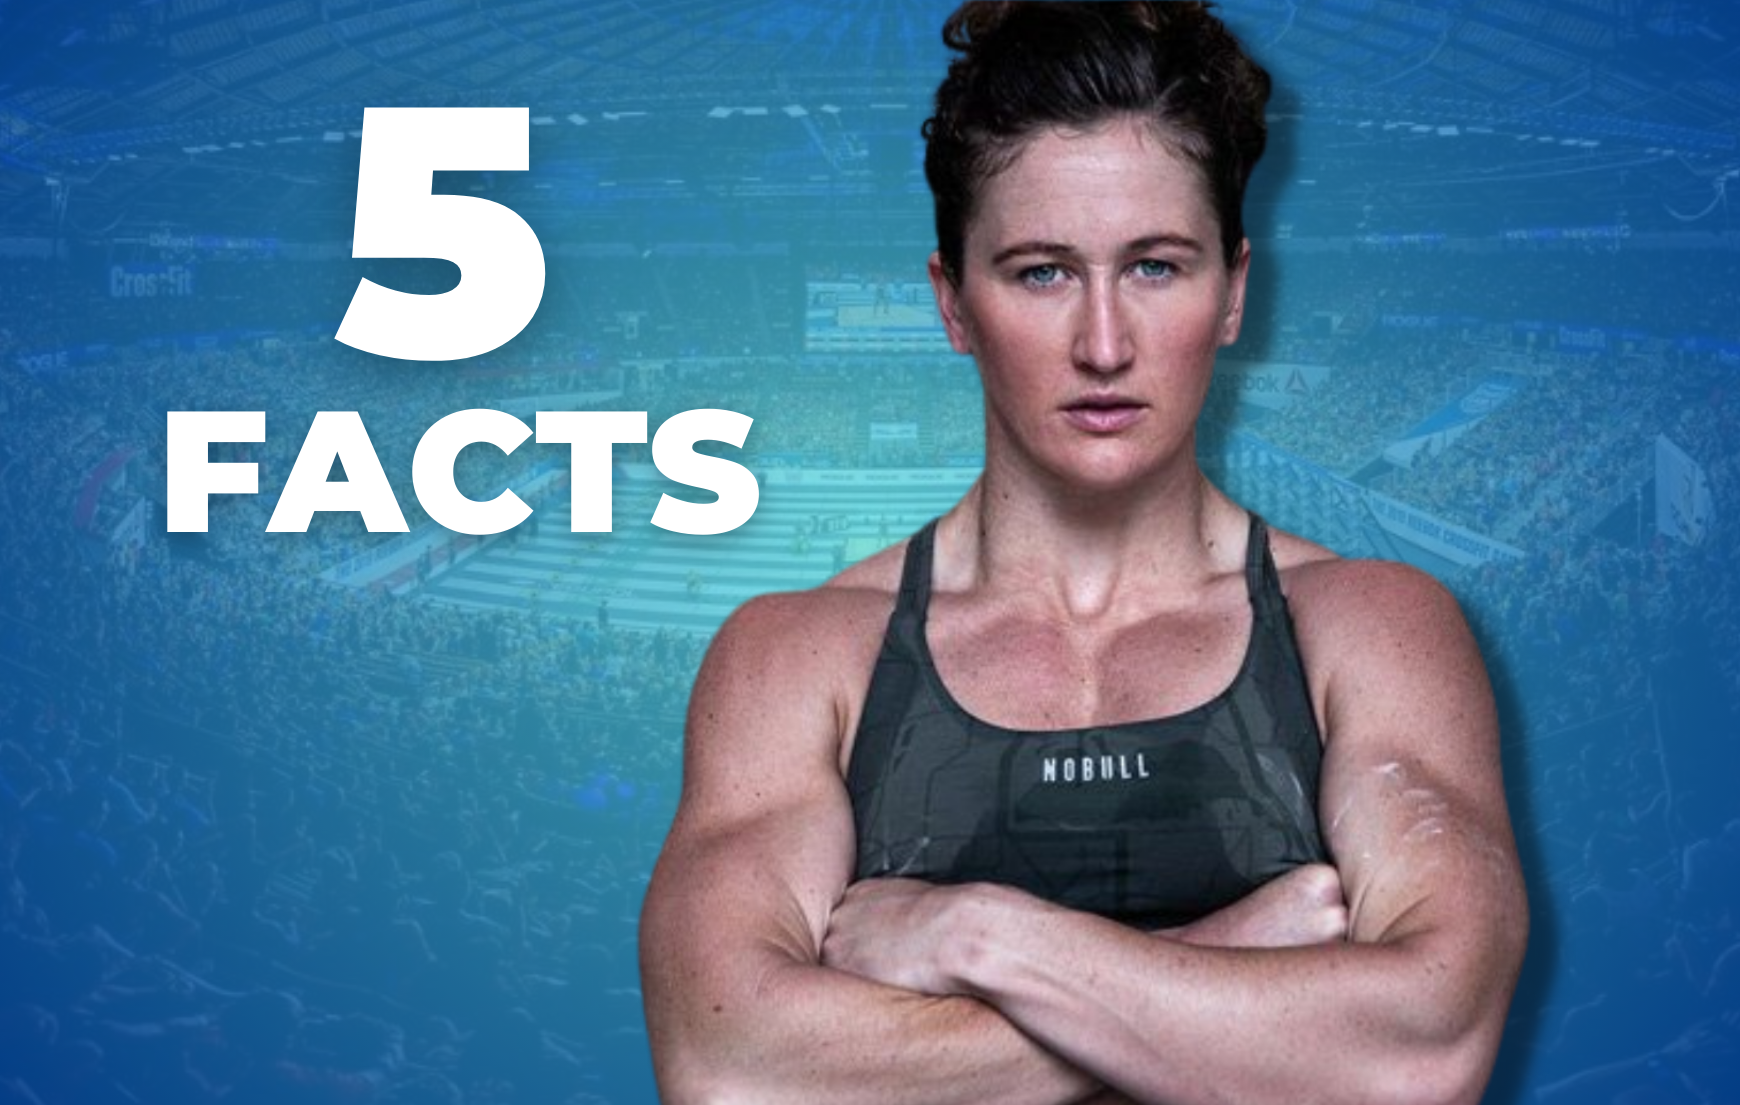 5 Facts You Didn’t Know About Tia-Clair Toomey